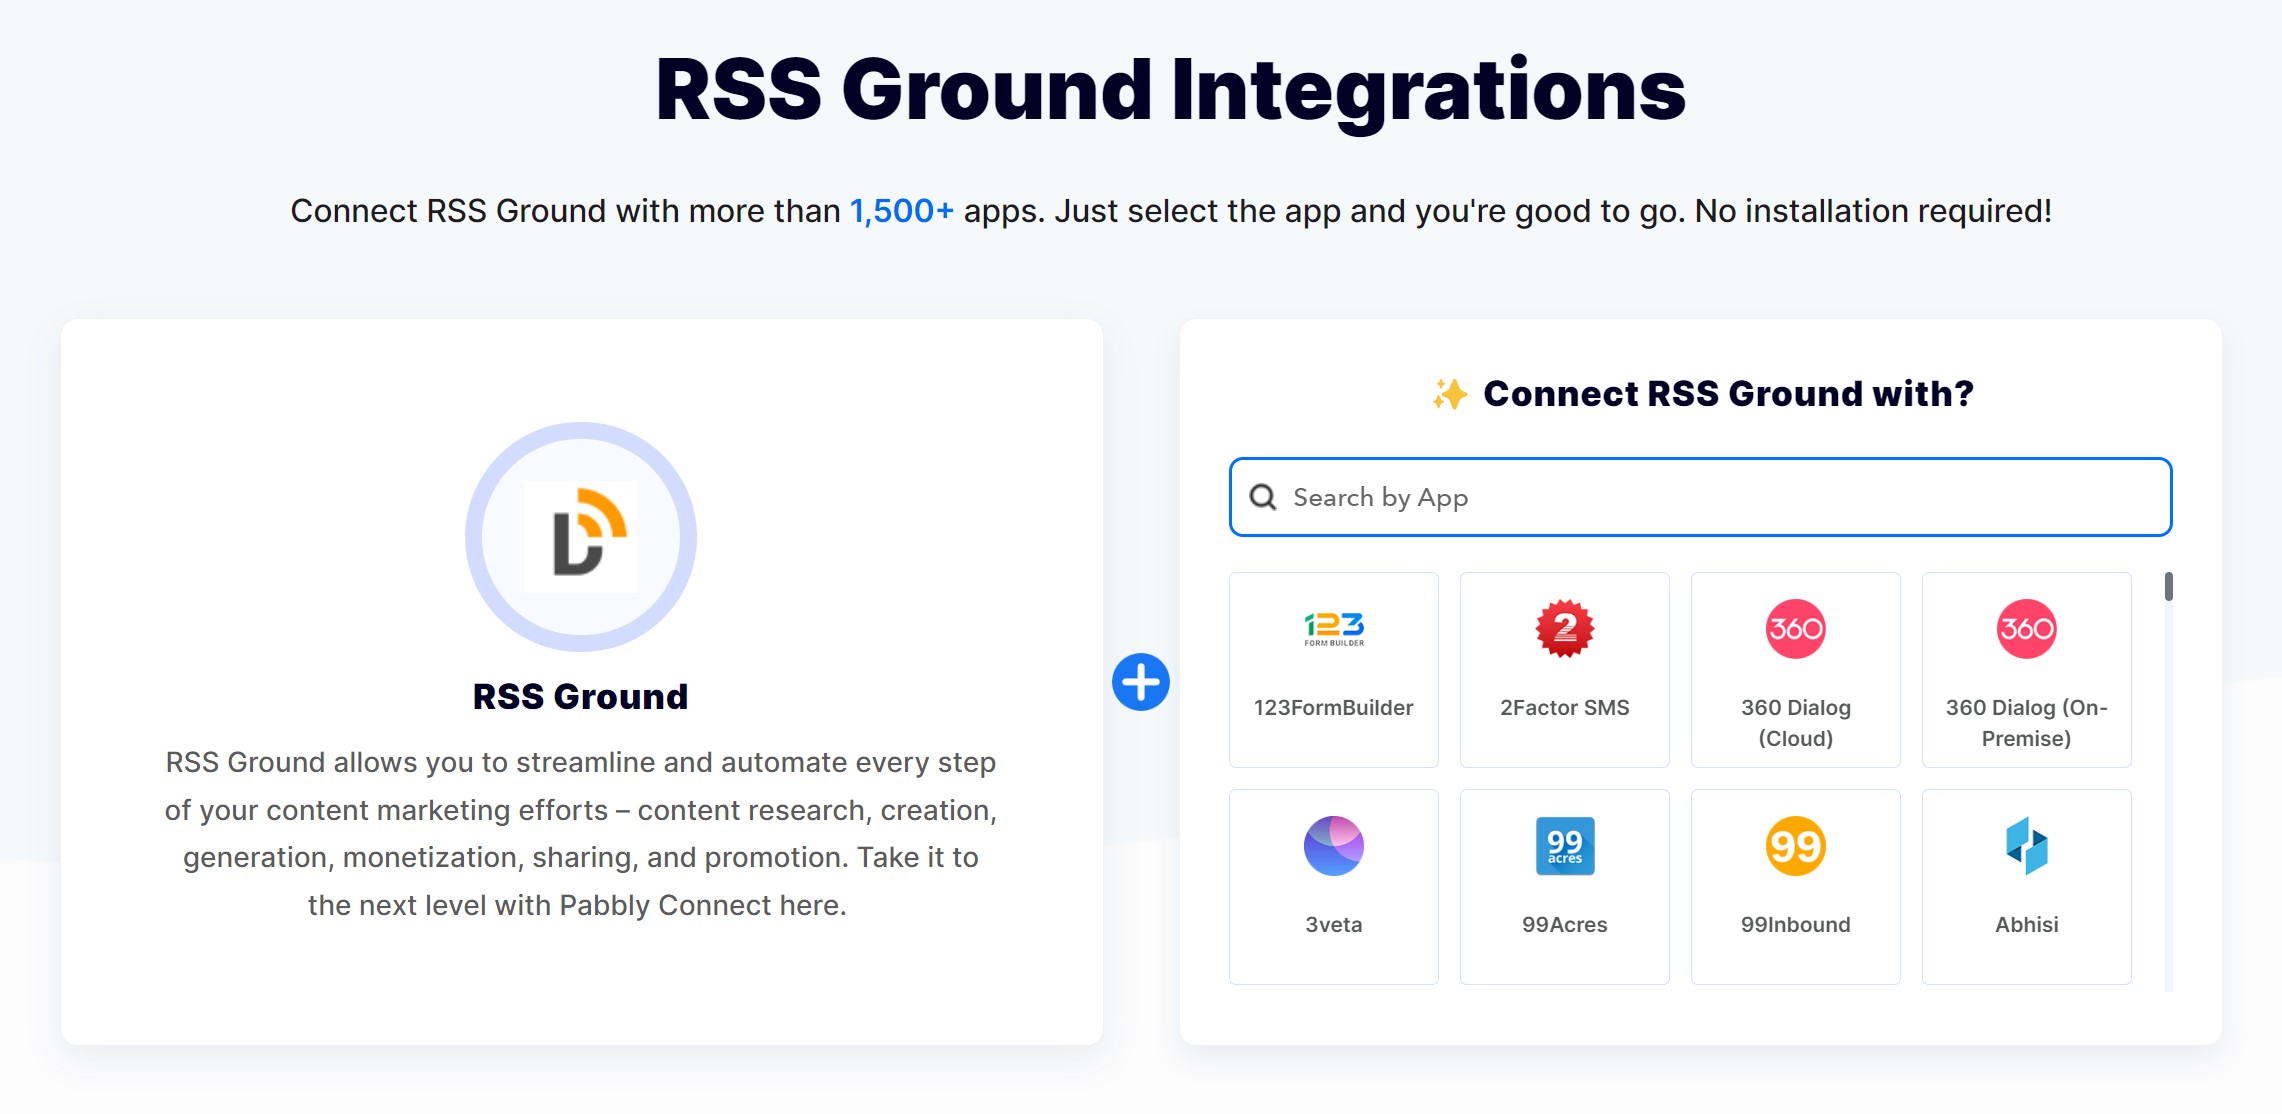 RSS Ground integration with Pabbly Connect